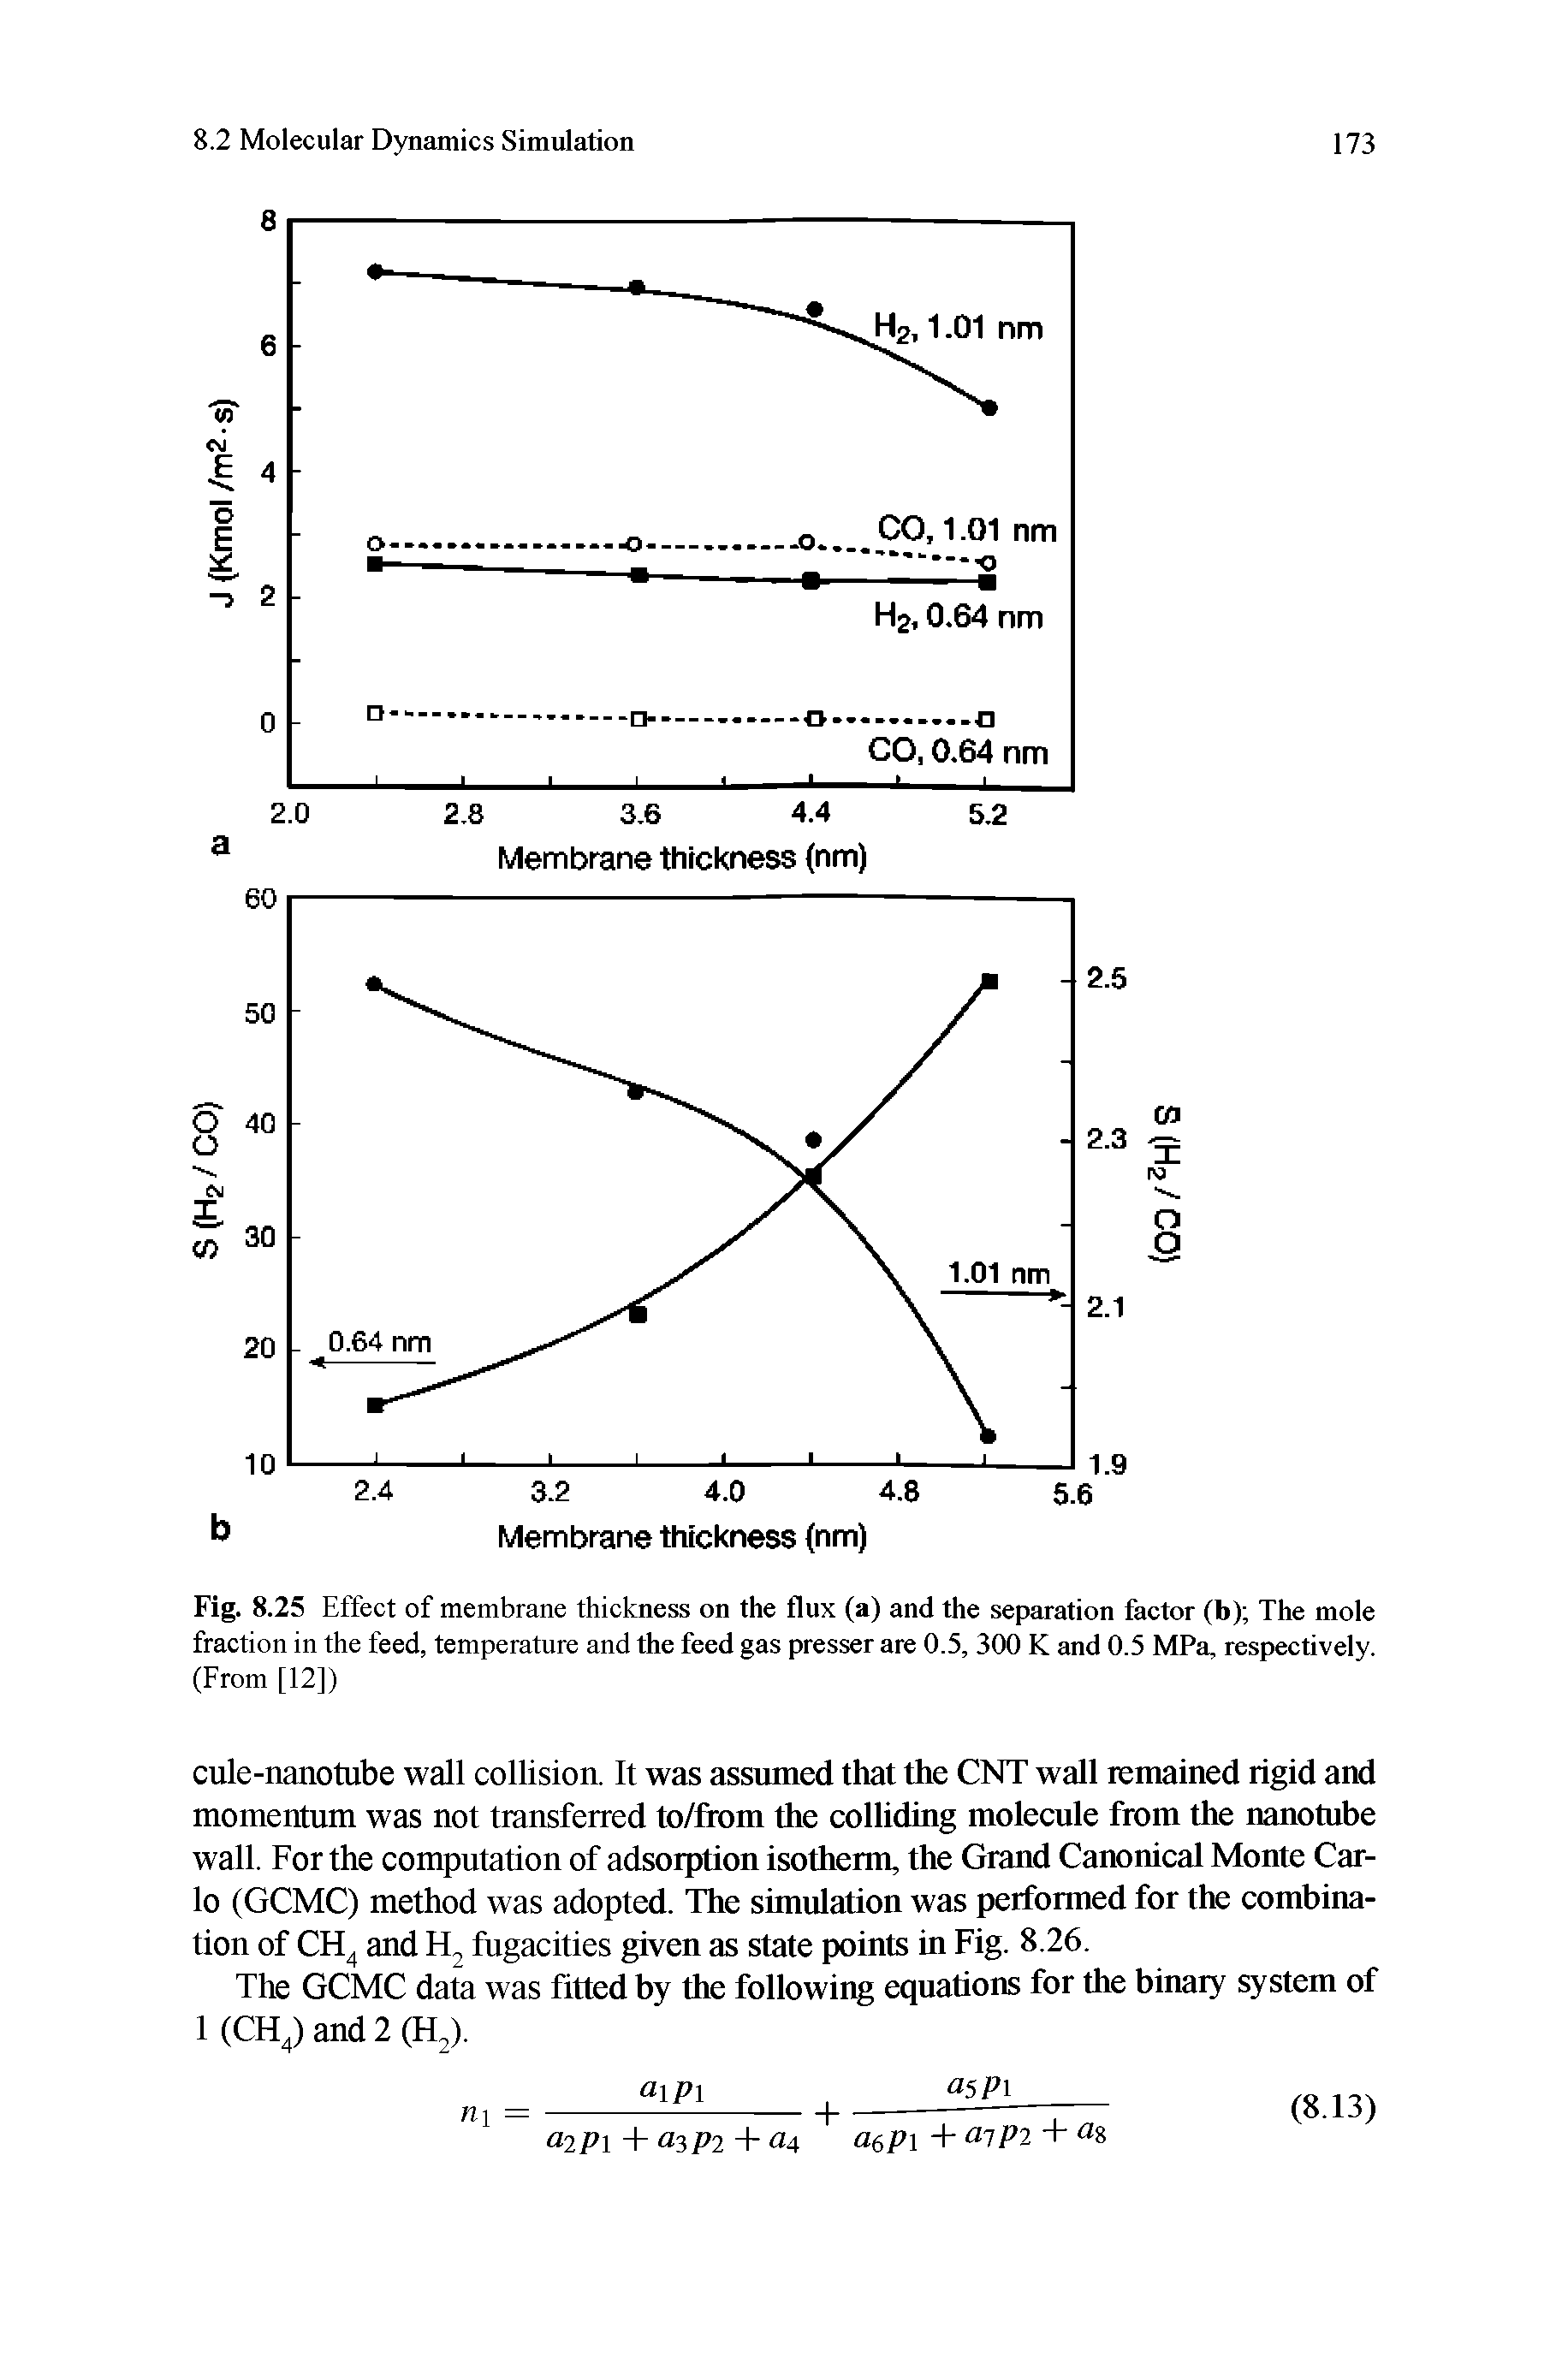 Fig. 8.25 Effect of membrane thickness on the flux (a) and the separation factor (b) The mole fraction in the feed, temperature and the feed gas presser are 0.5, 300 K and 0.5 MPa, respectively. (From [12])...